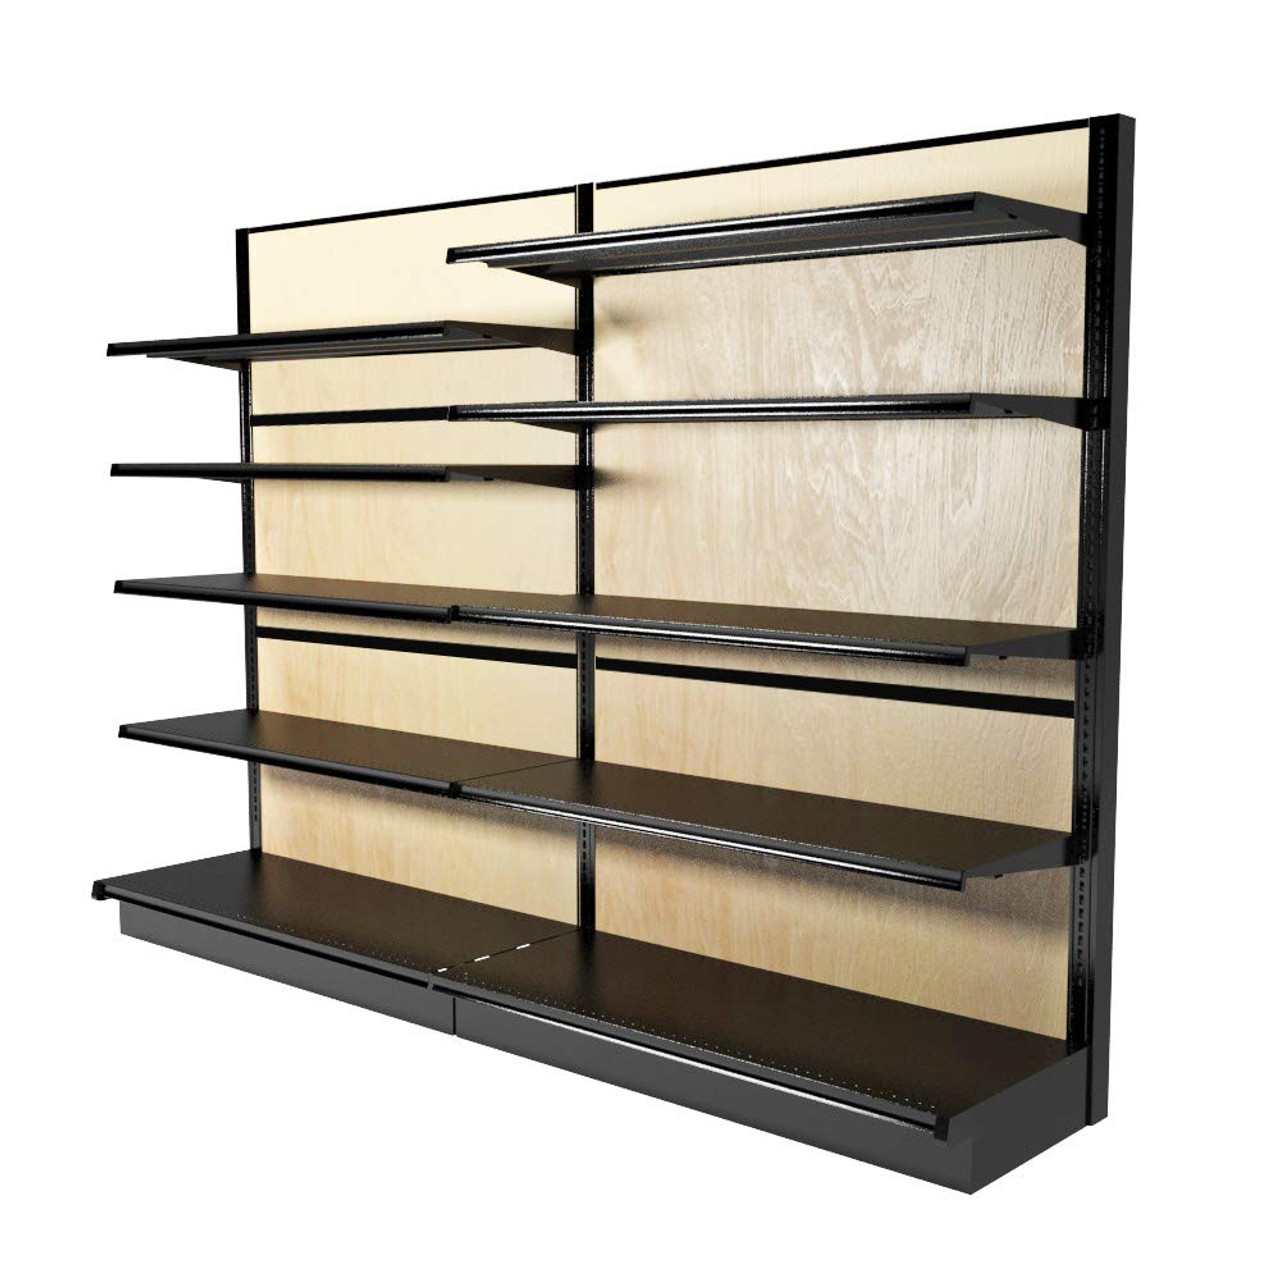 Lozier Stained Wood Wall Gondola Shelving Kits Dgs Retail